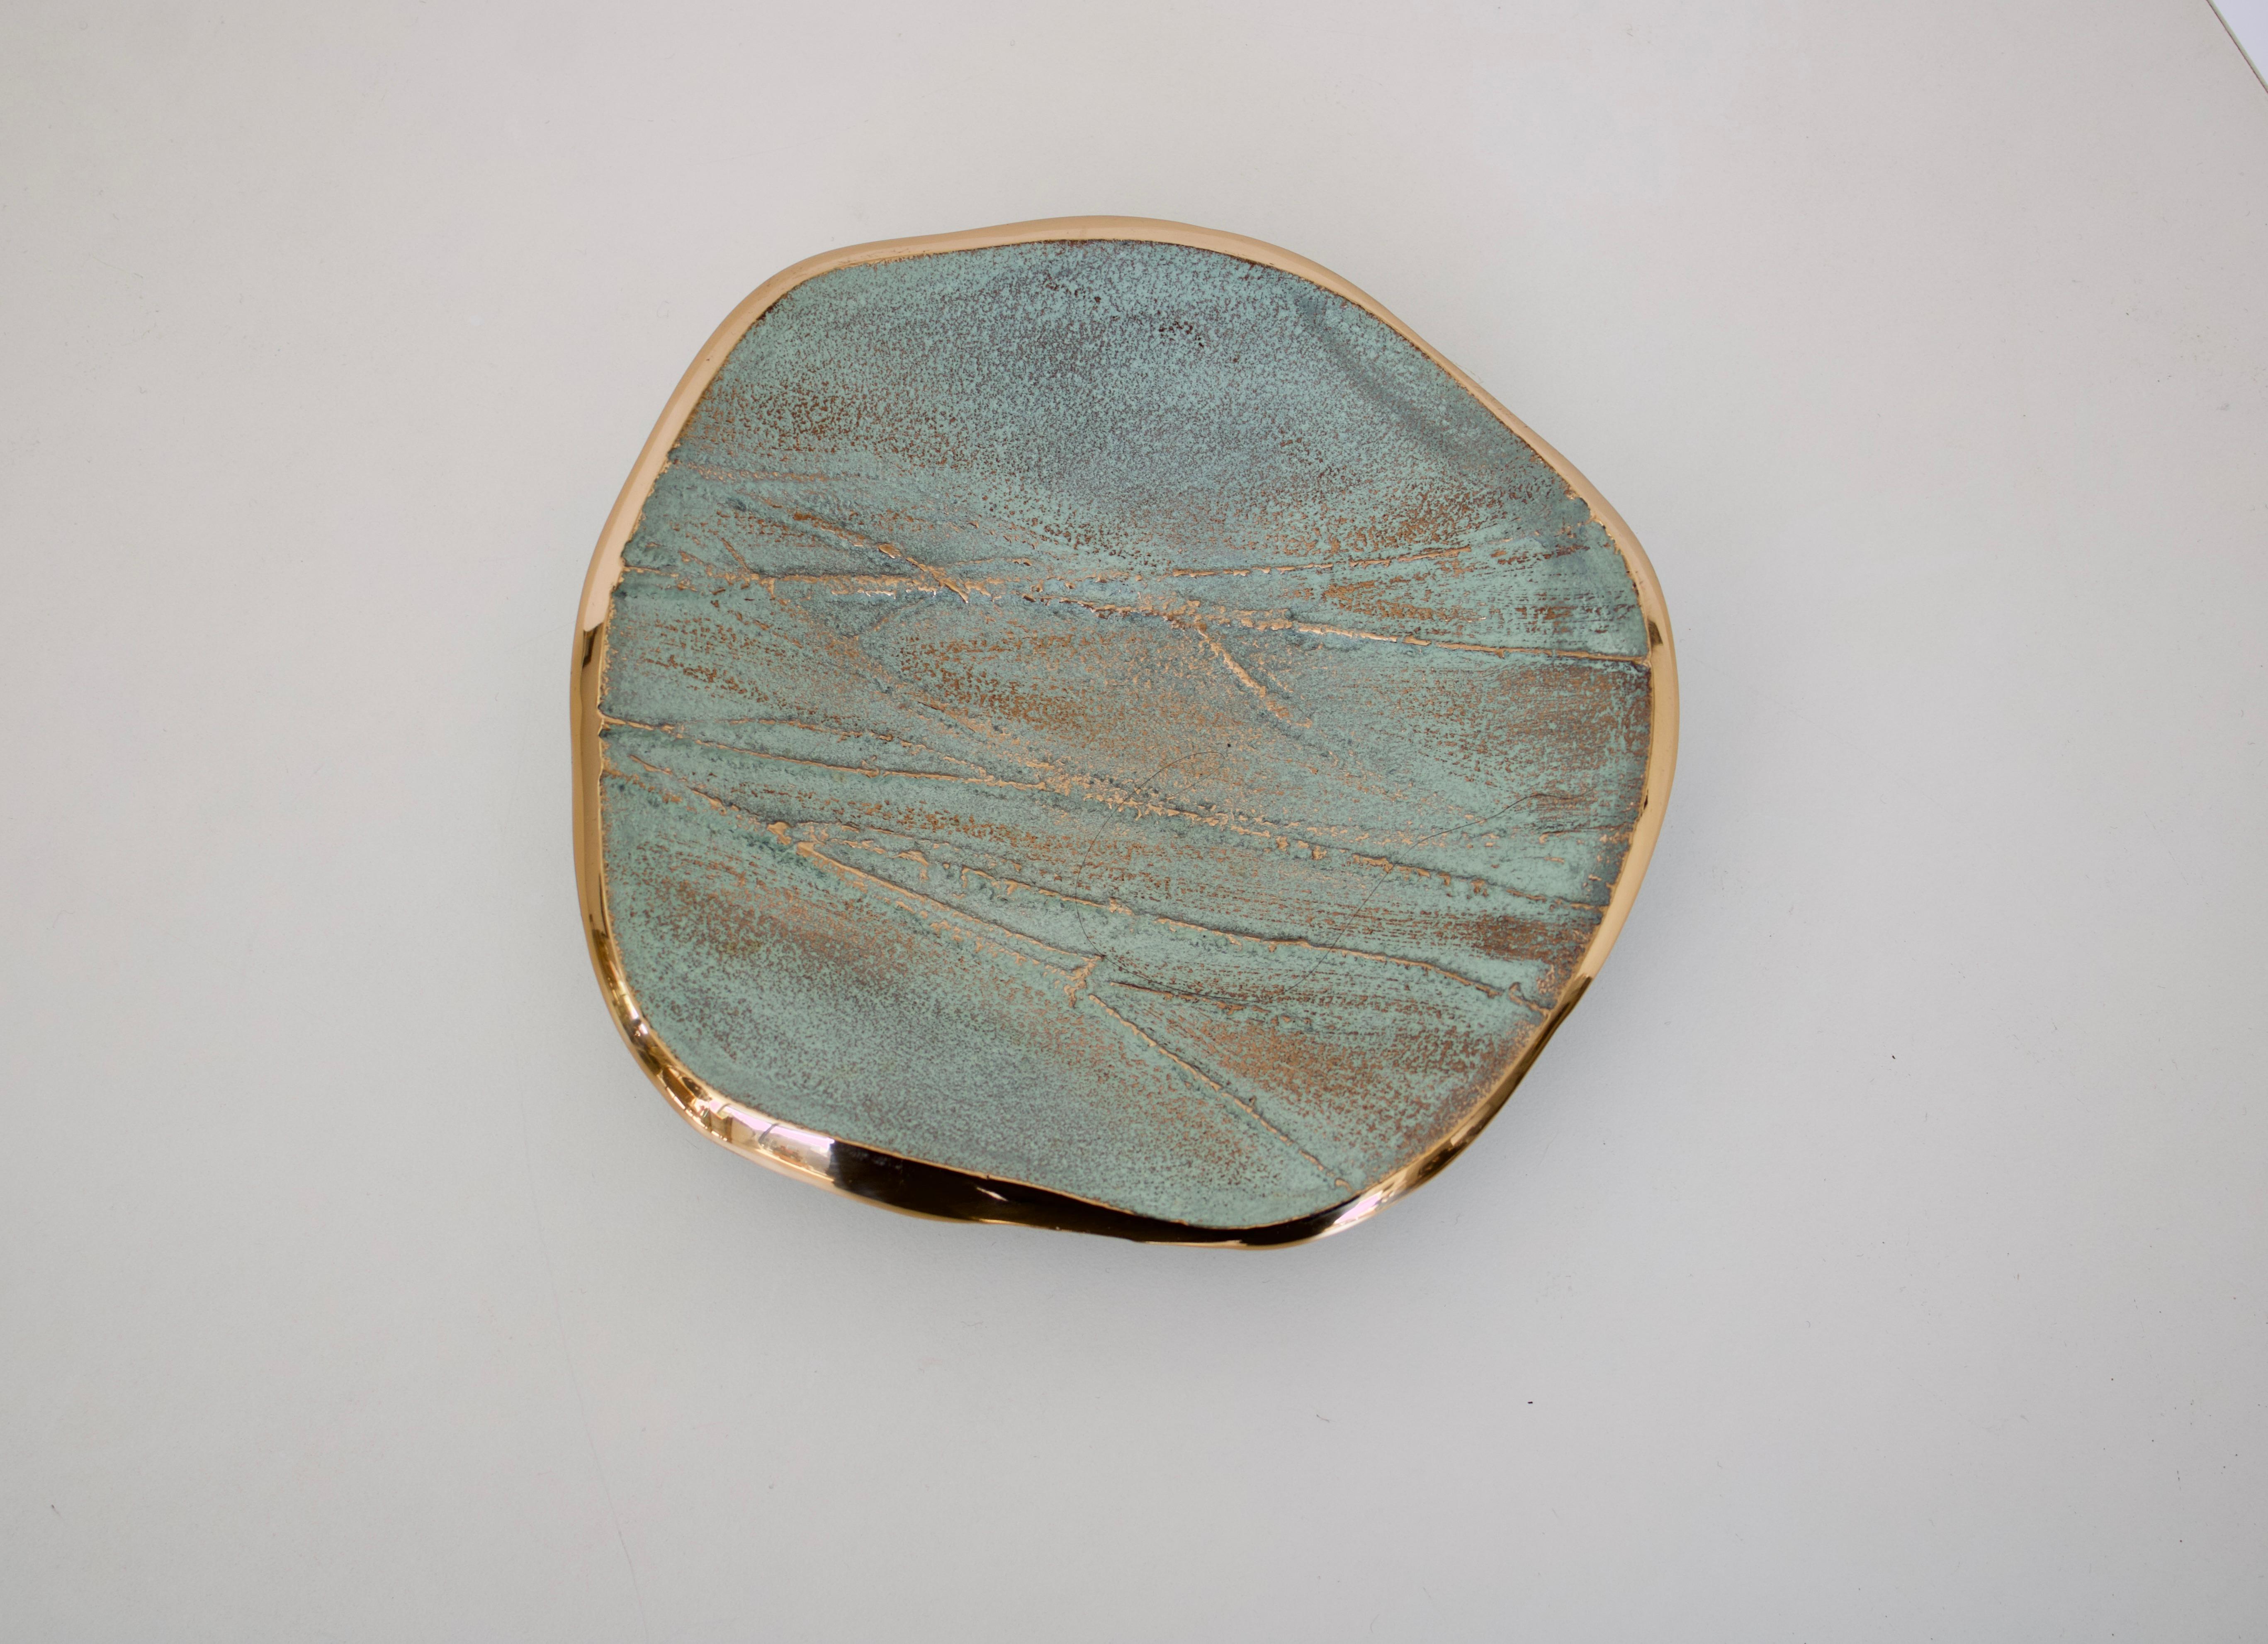 French low relief bronze dish or vide poche designed by French designer Serge Mansau for Monique Gerber in the Stratos collection with a variety of patina and polished edge. He was a famous French sculptor and creator of more than three hundred